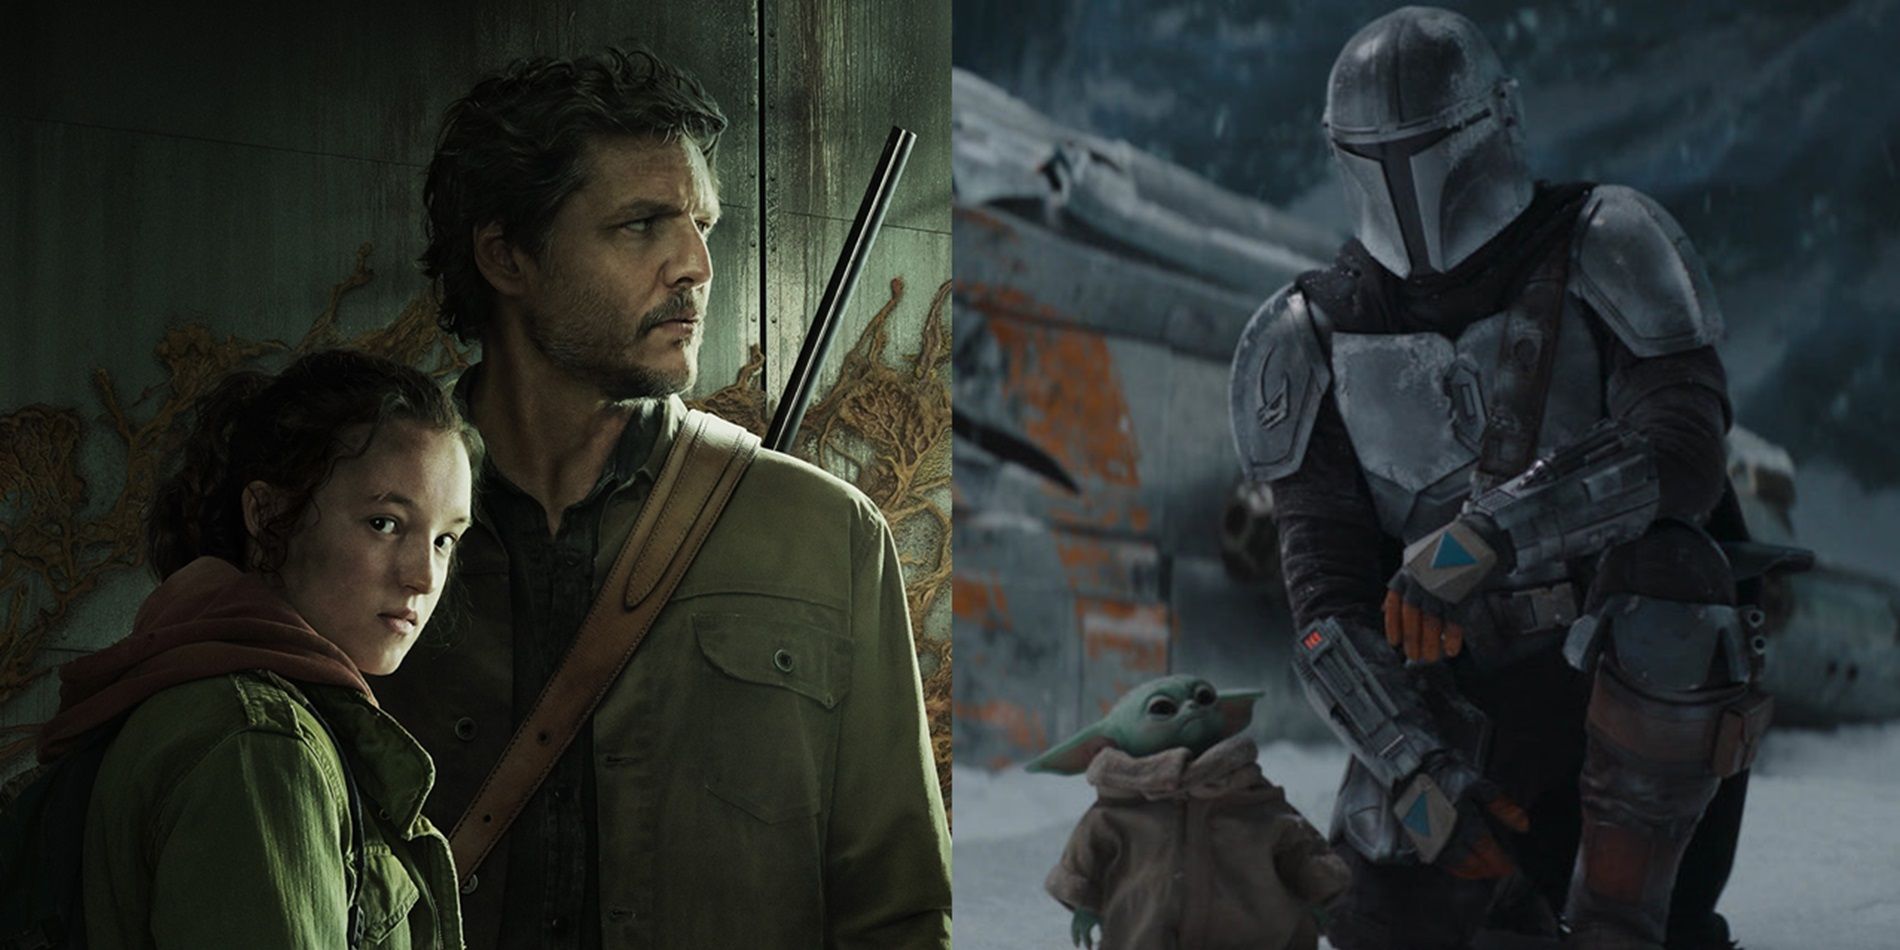 Split_image_of_Joel_and_Ellie_in_The_Last_of_Us_and_Mando_and_Grogu_in_The_Mandalorian